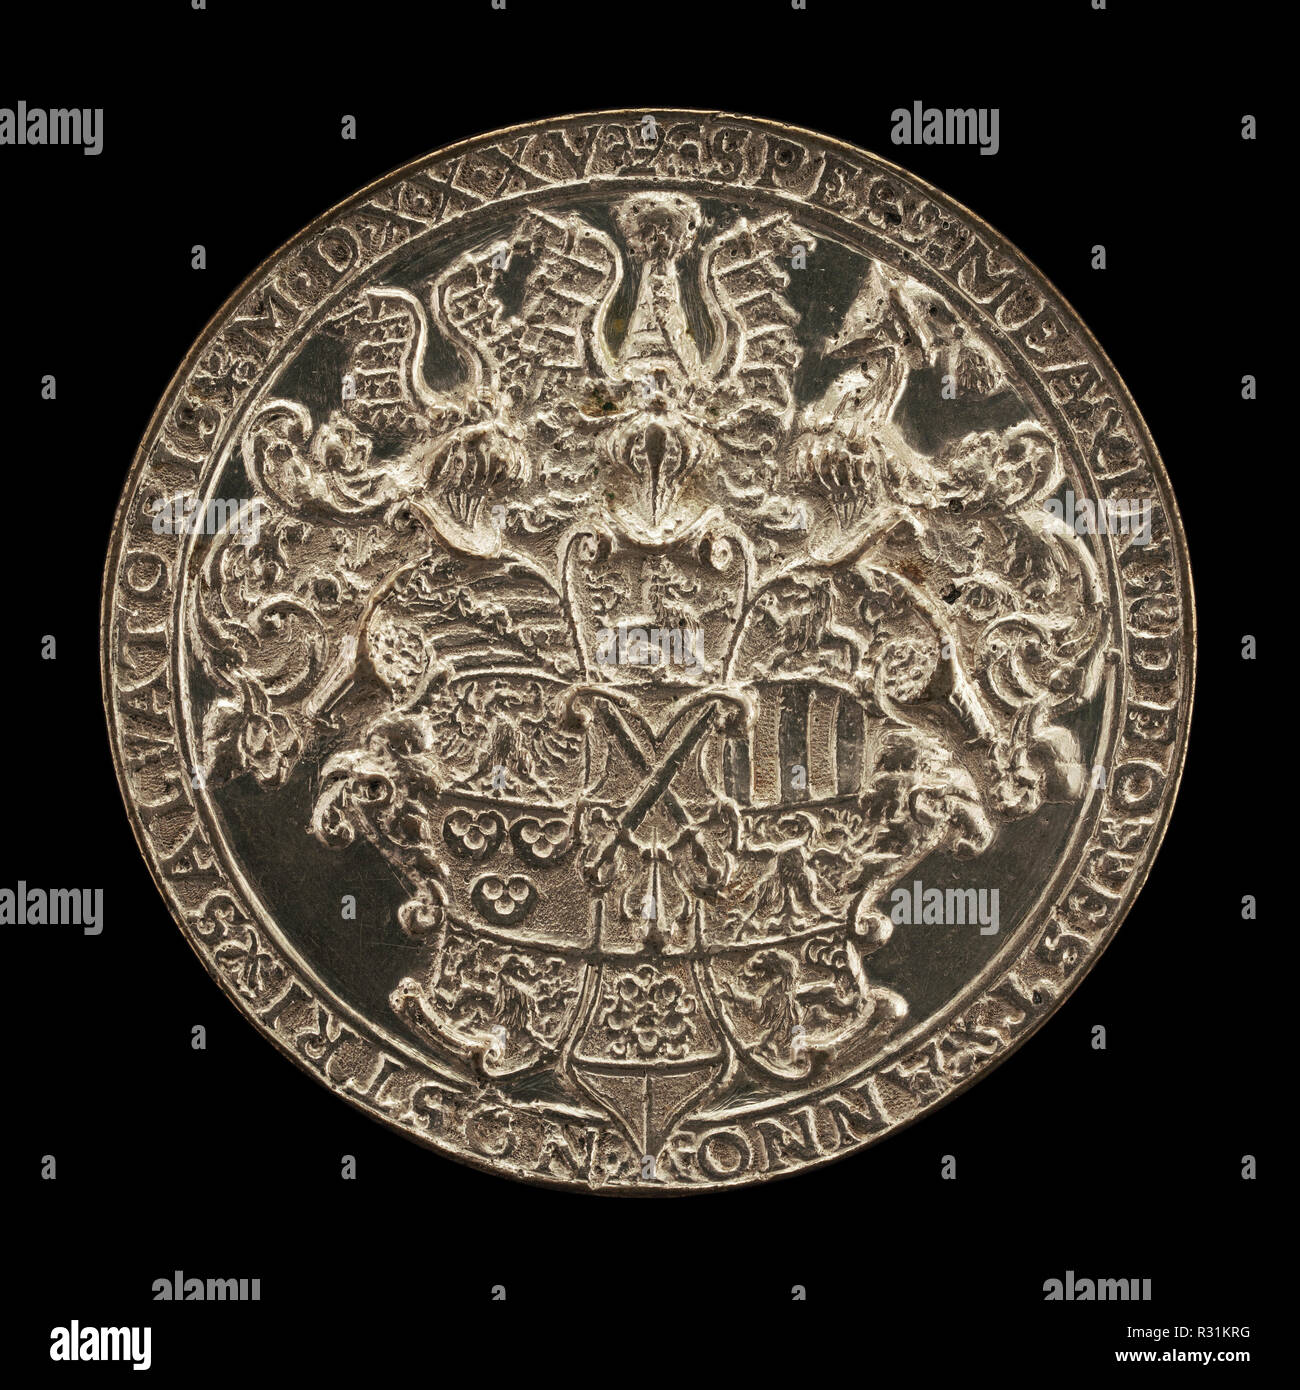 Shield with Helms and Crests [reverse]. Dated: 1535. Dimensions: overall (diameter): 6.51 cm (2 9/16 in.)  gross weight: 66.65 gr (0.147 lb.)  axis: 12:006.51. Medium: silver. Museum: National Gallery of Art, Washington DC. Author: Hans Reinhart the Elder. Stock Photo